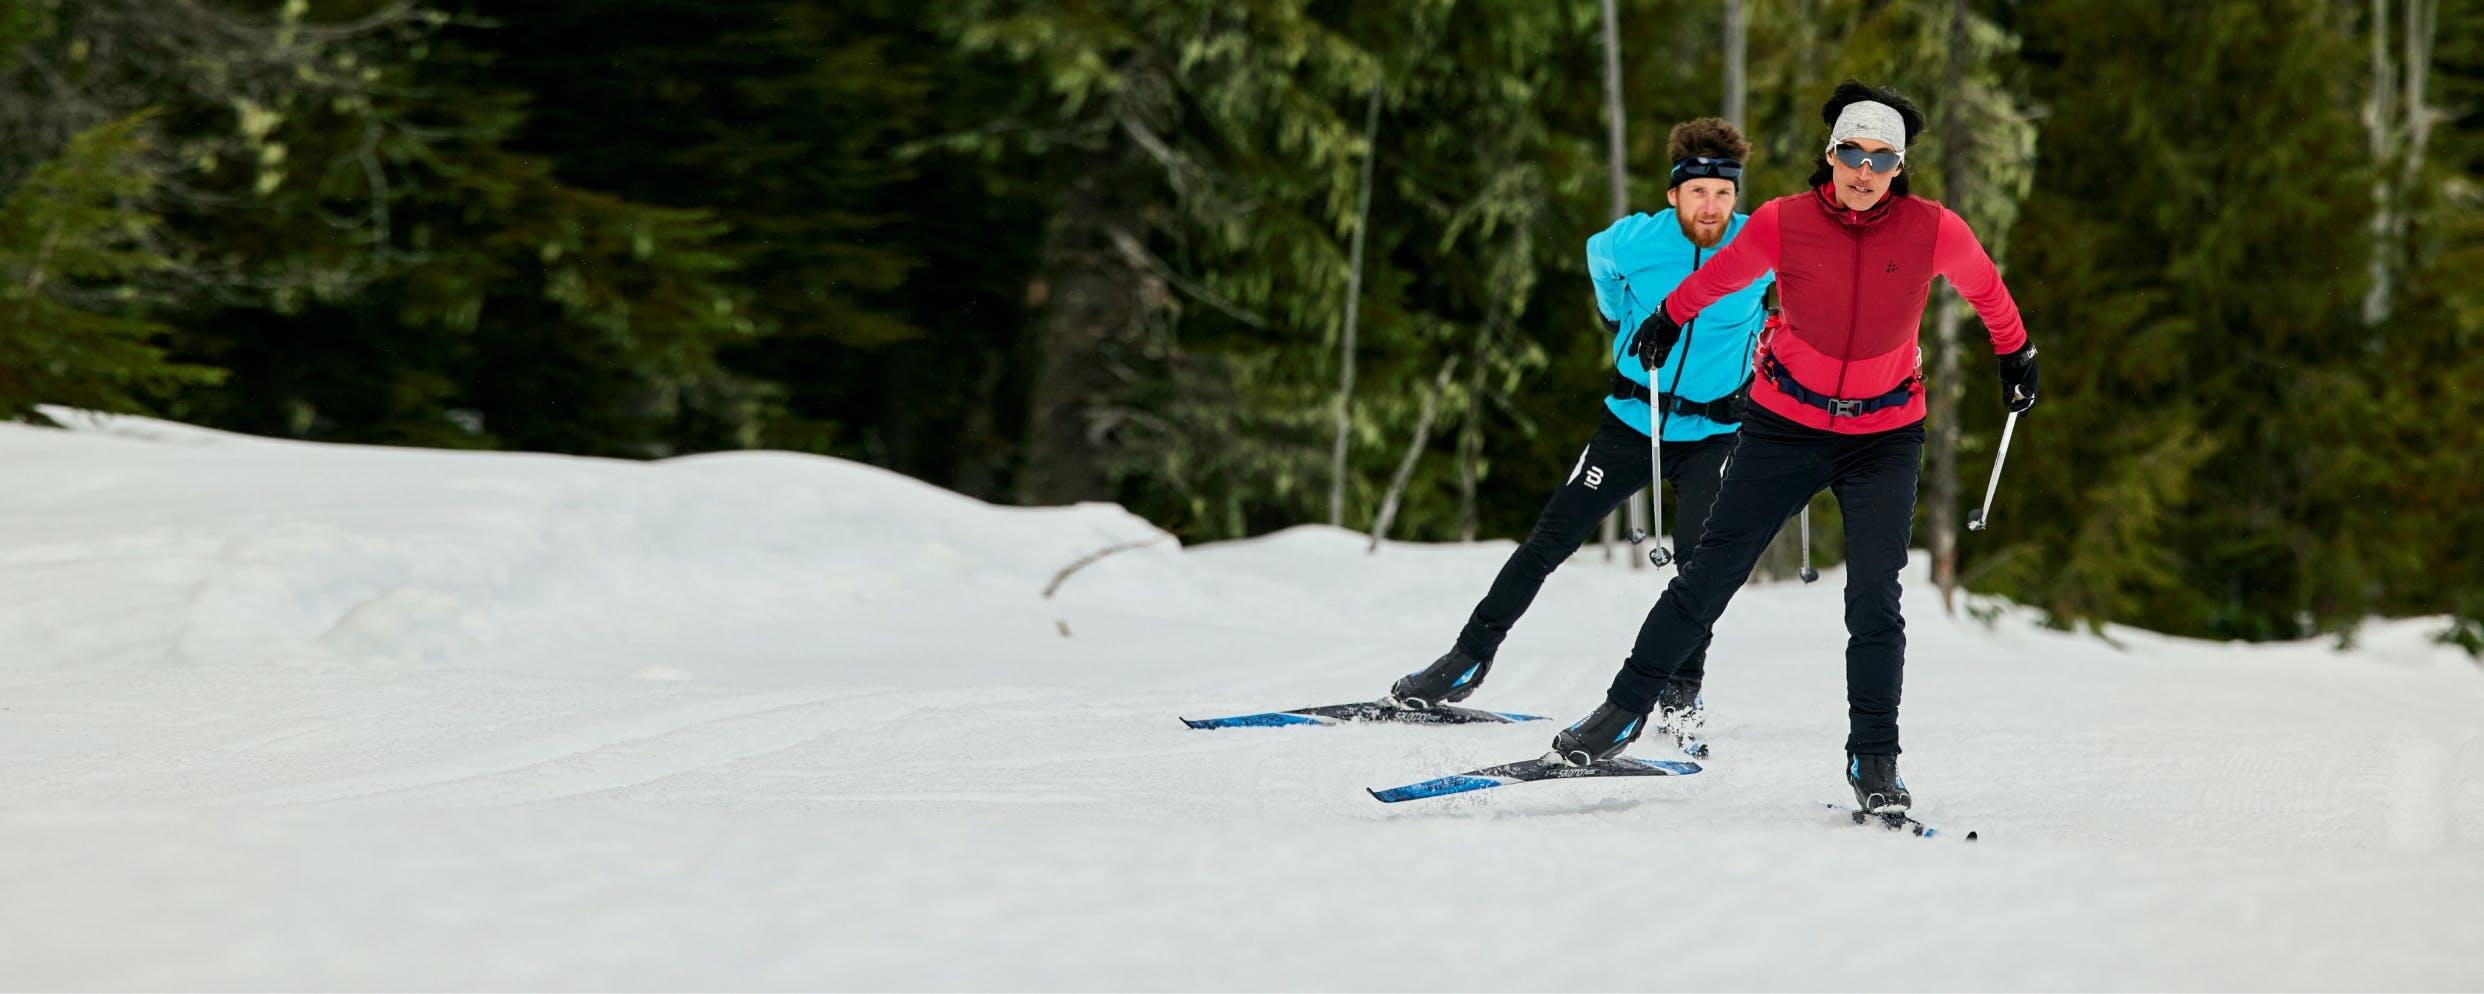 Find out how to choose a pair of skis for classic, skate or light off-track touring.